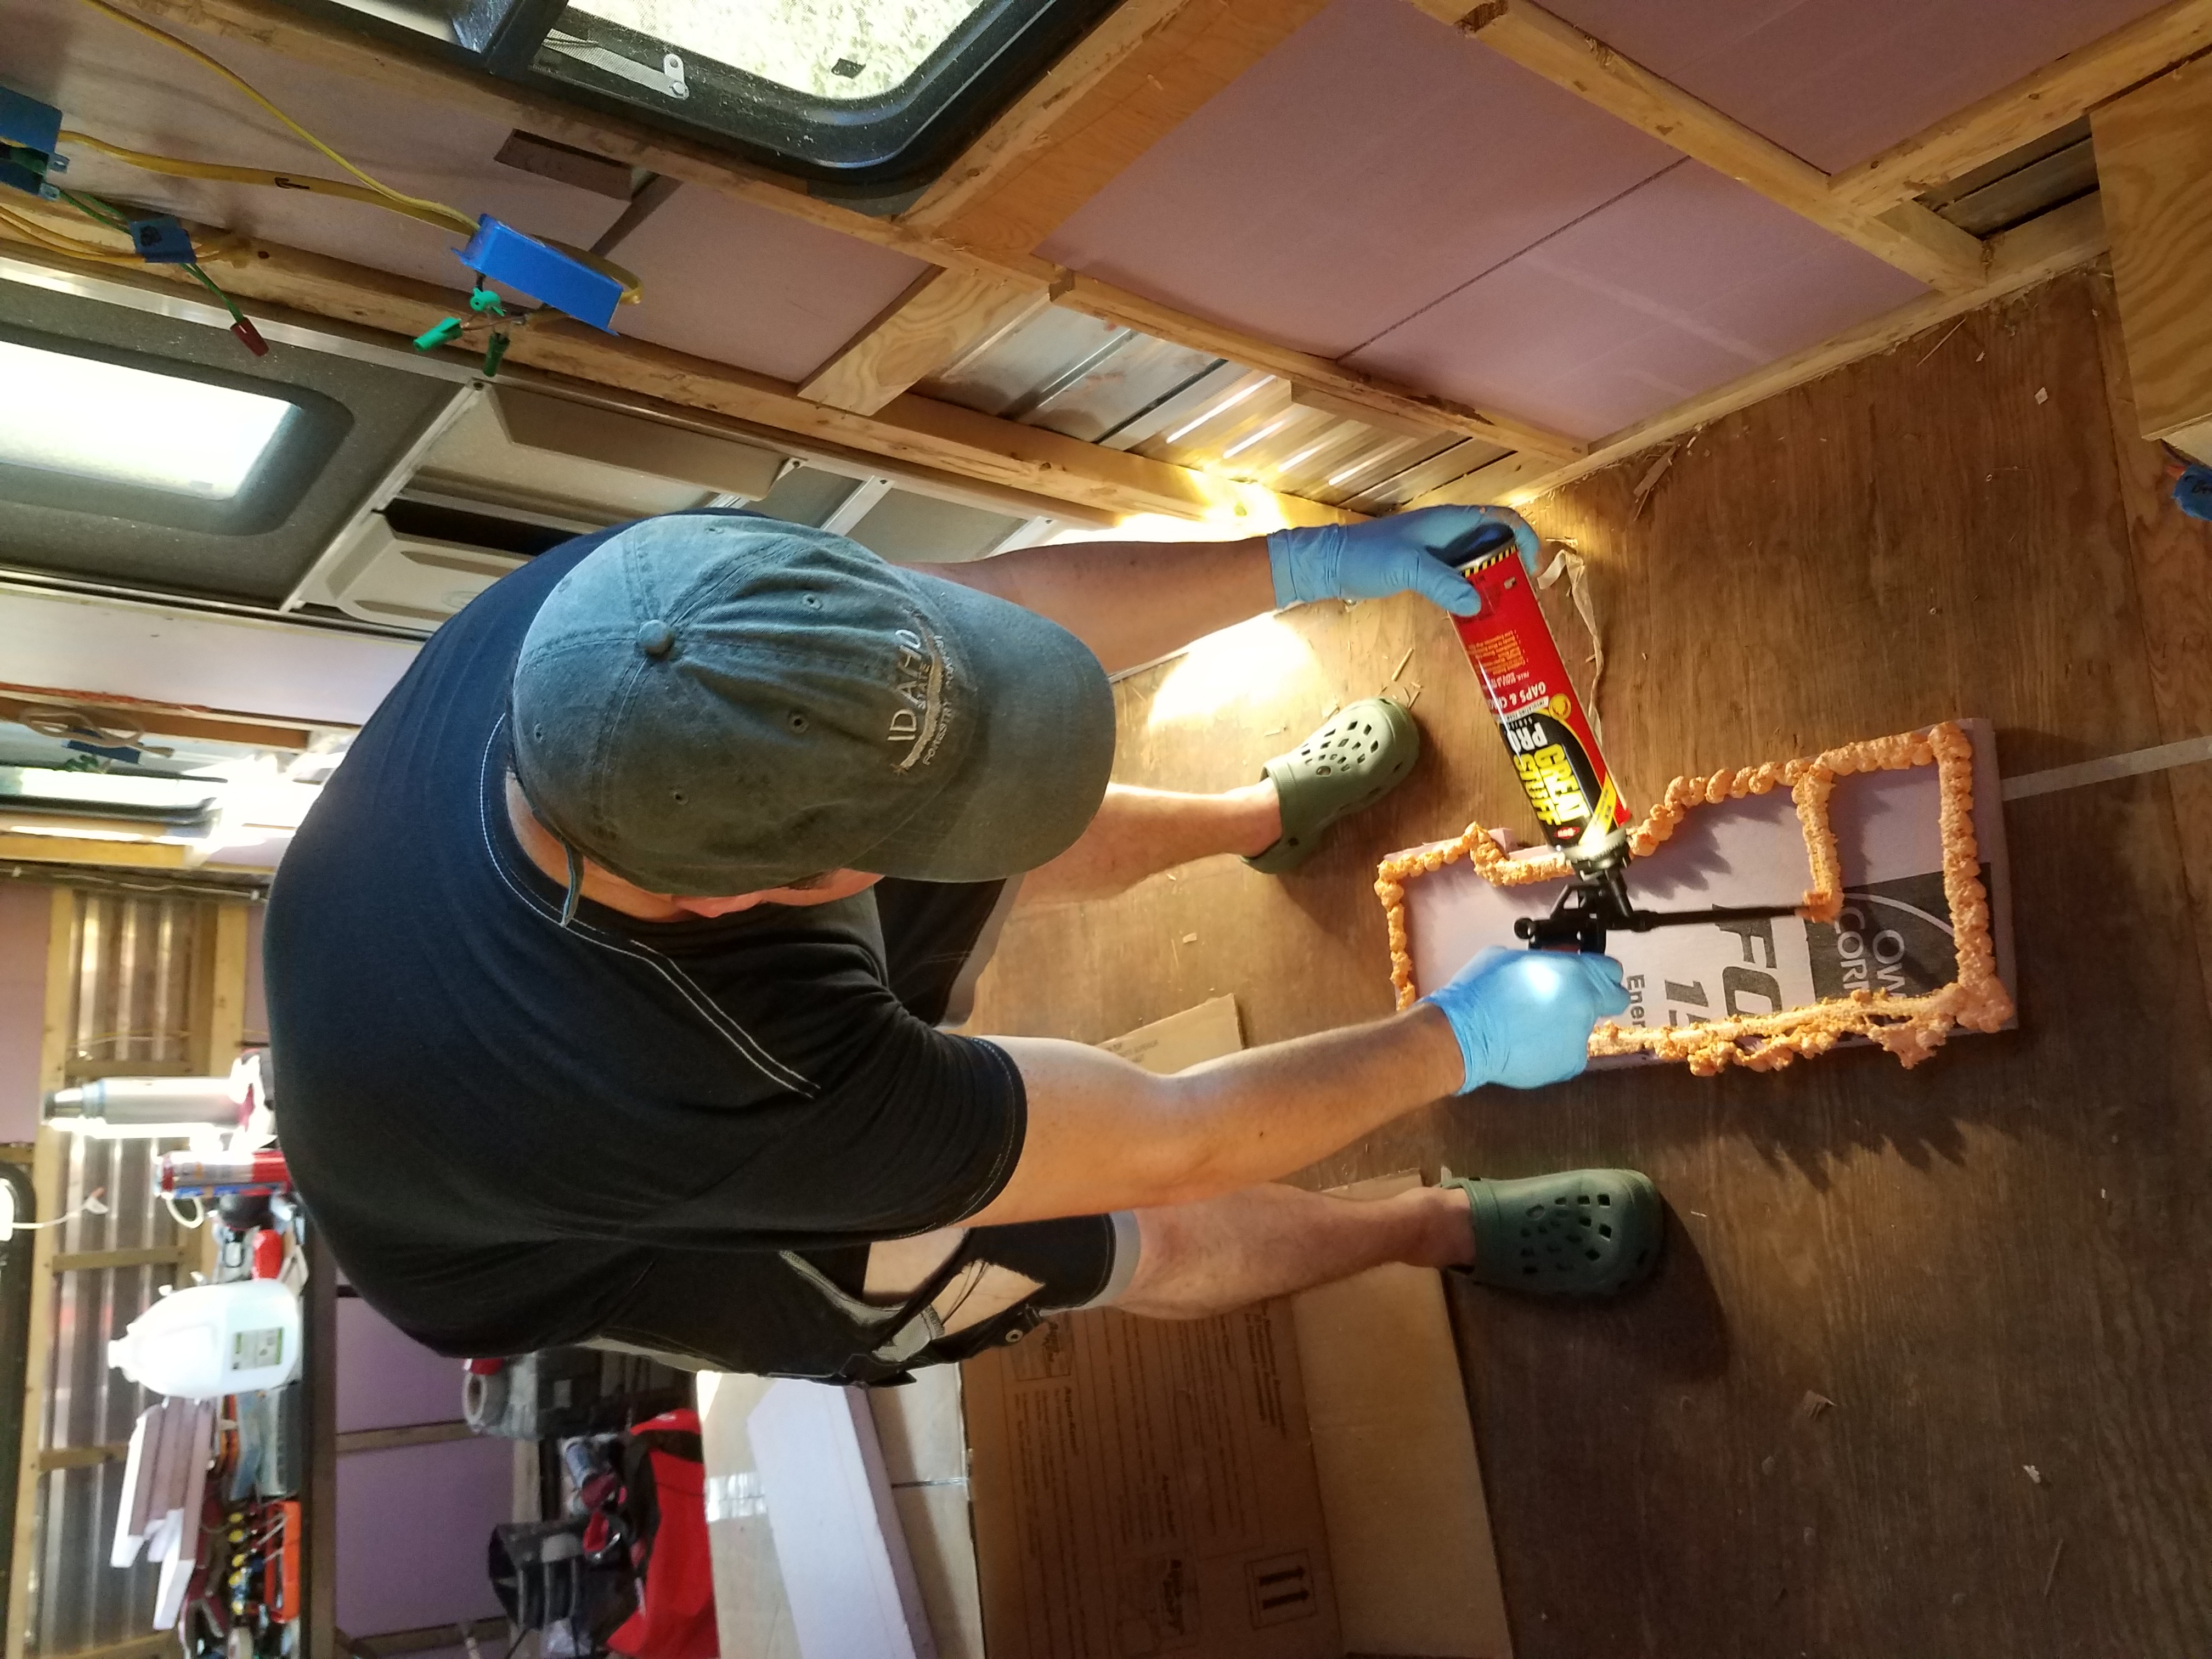 A man sprays foaming sealant on an insulation board in the travel trailer